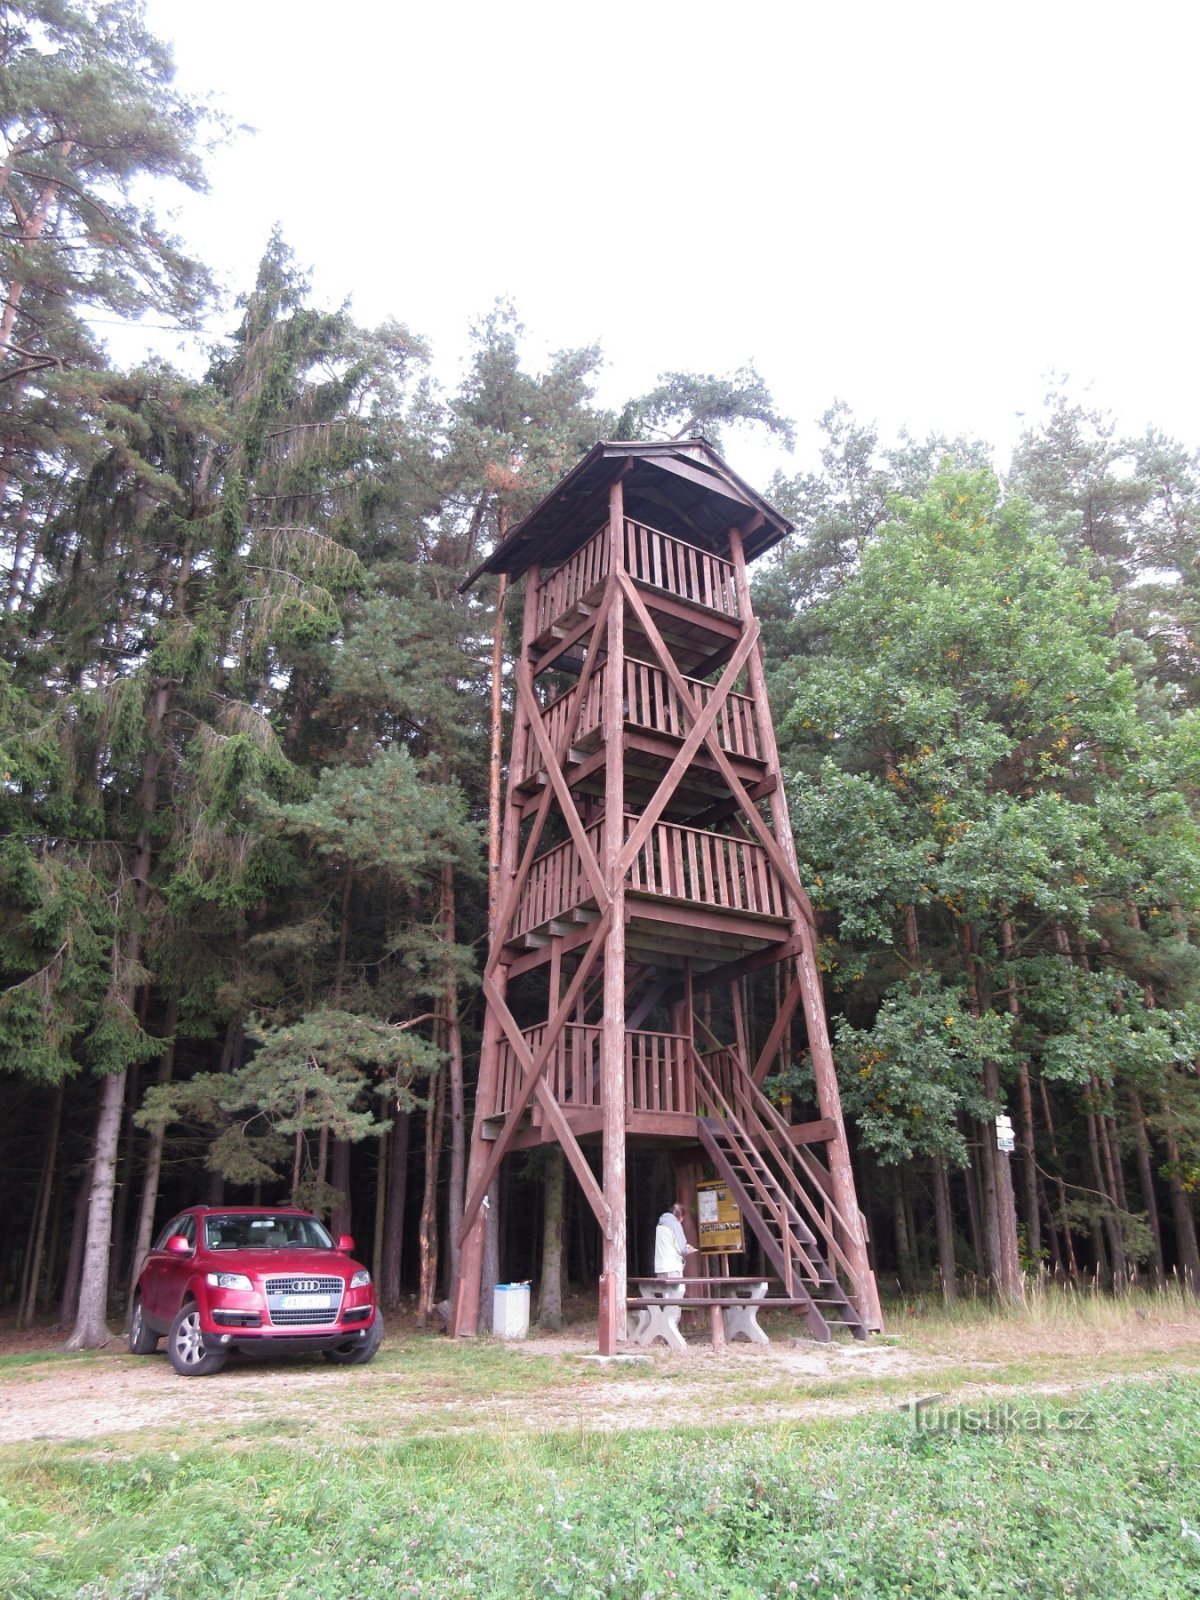 Radětice – village and lookout tower